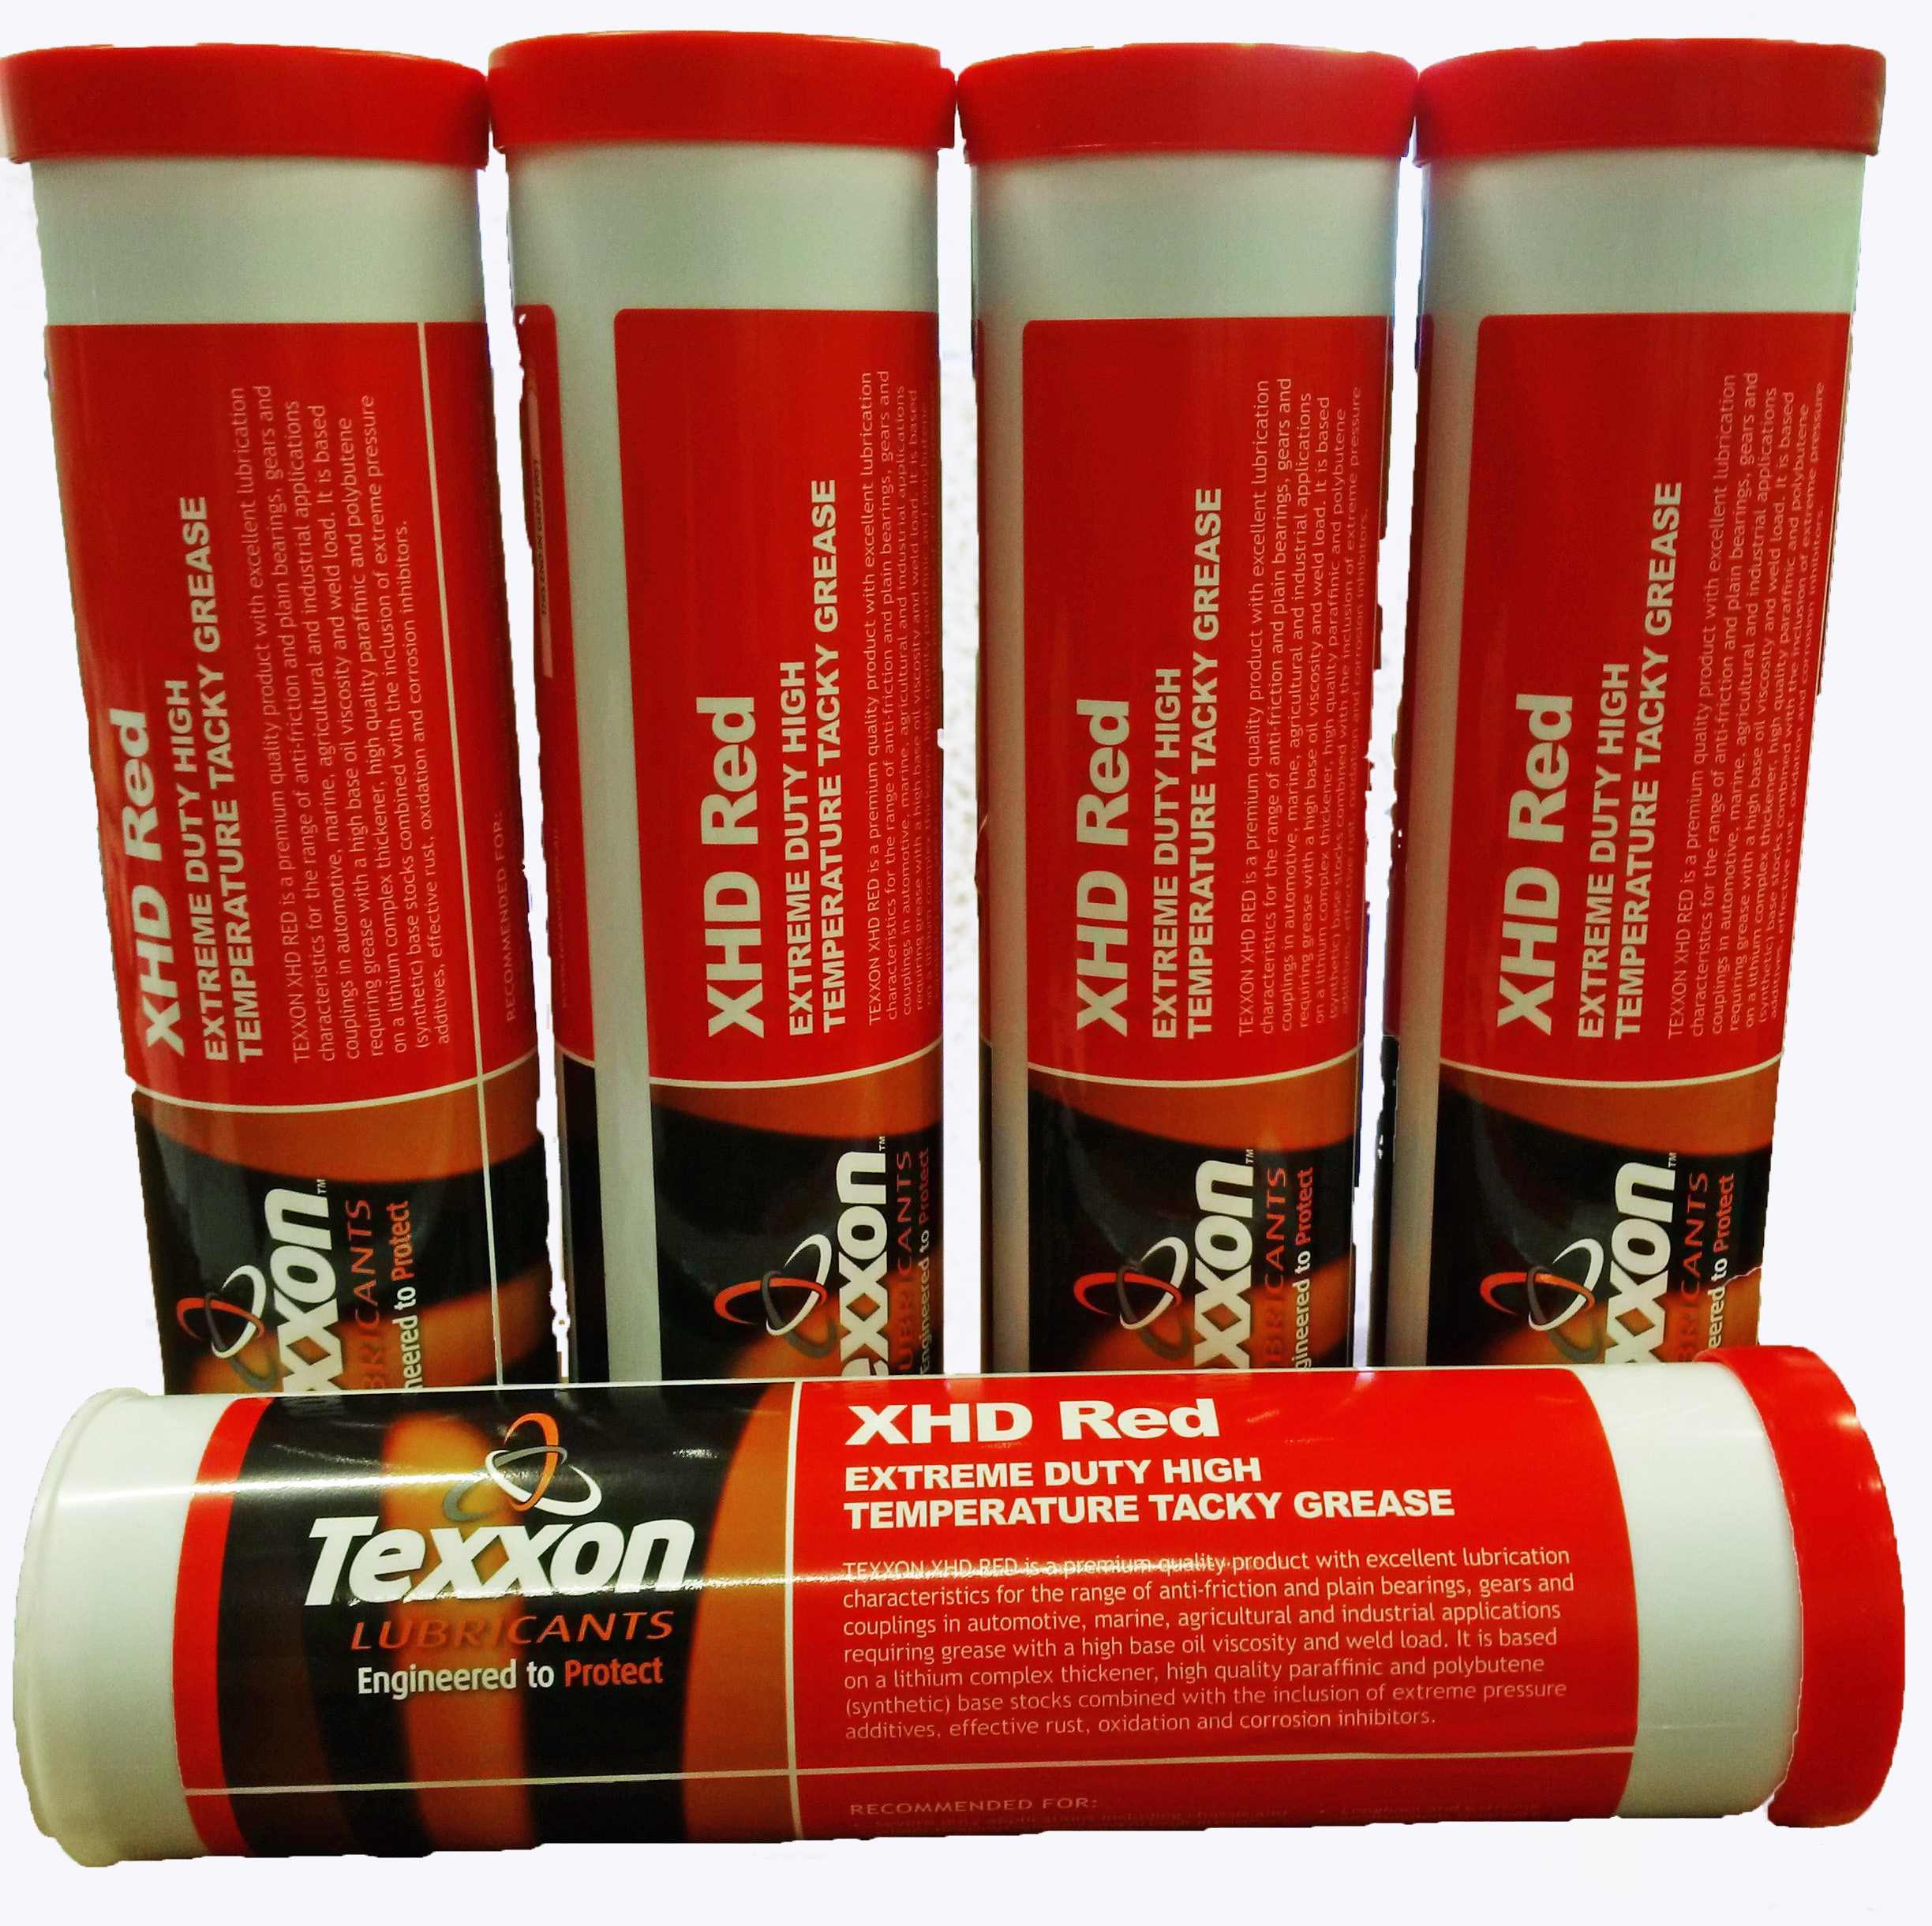 TEXXON XHD Red Earthmoving Equipment Grease